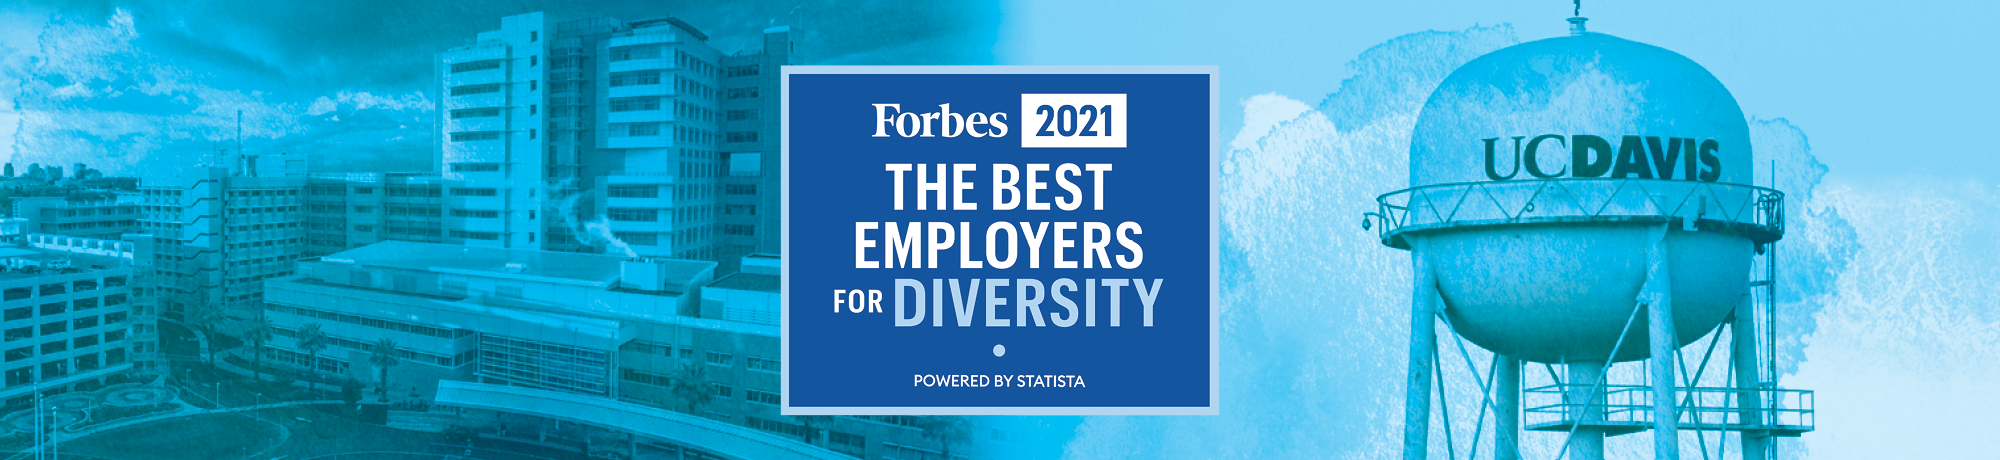 Forbes 2021 Best Employers for Diversity banner image.